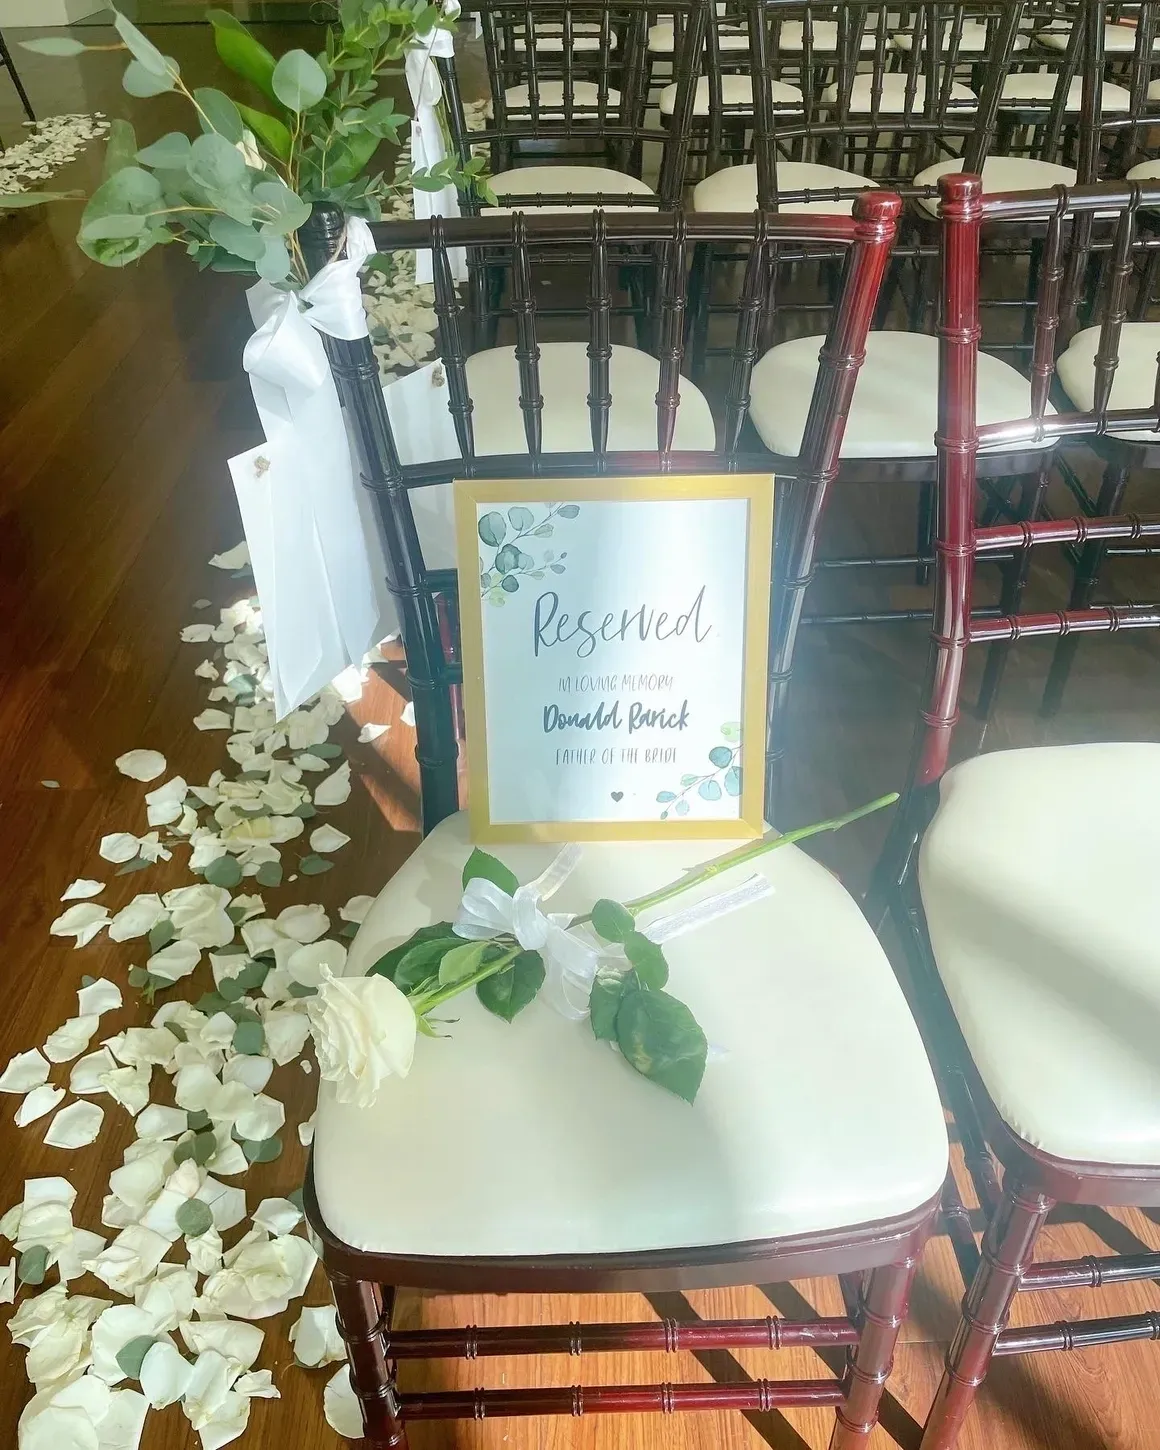 A chair with a sign on it and some flowers